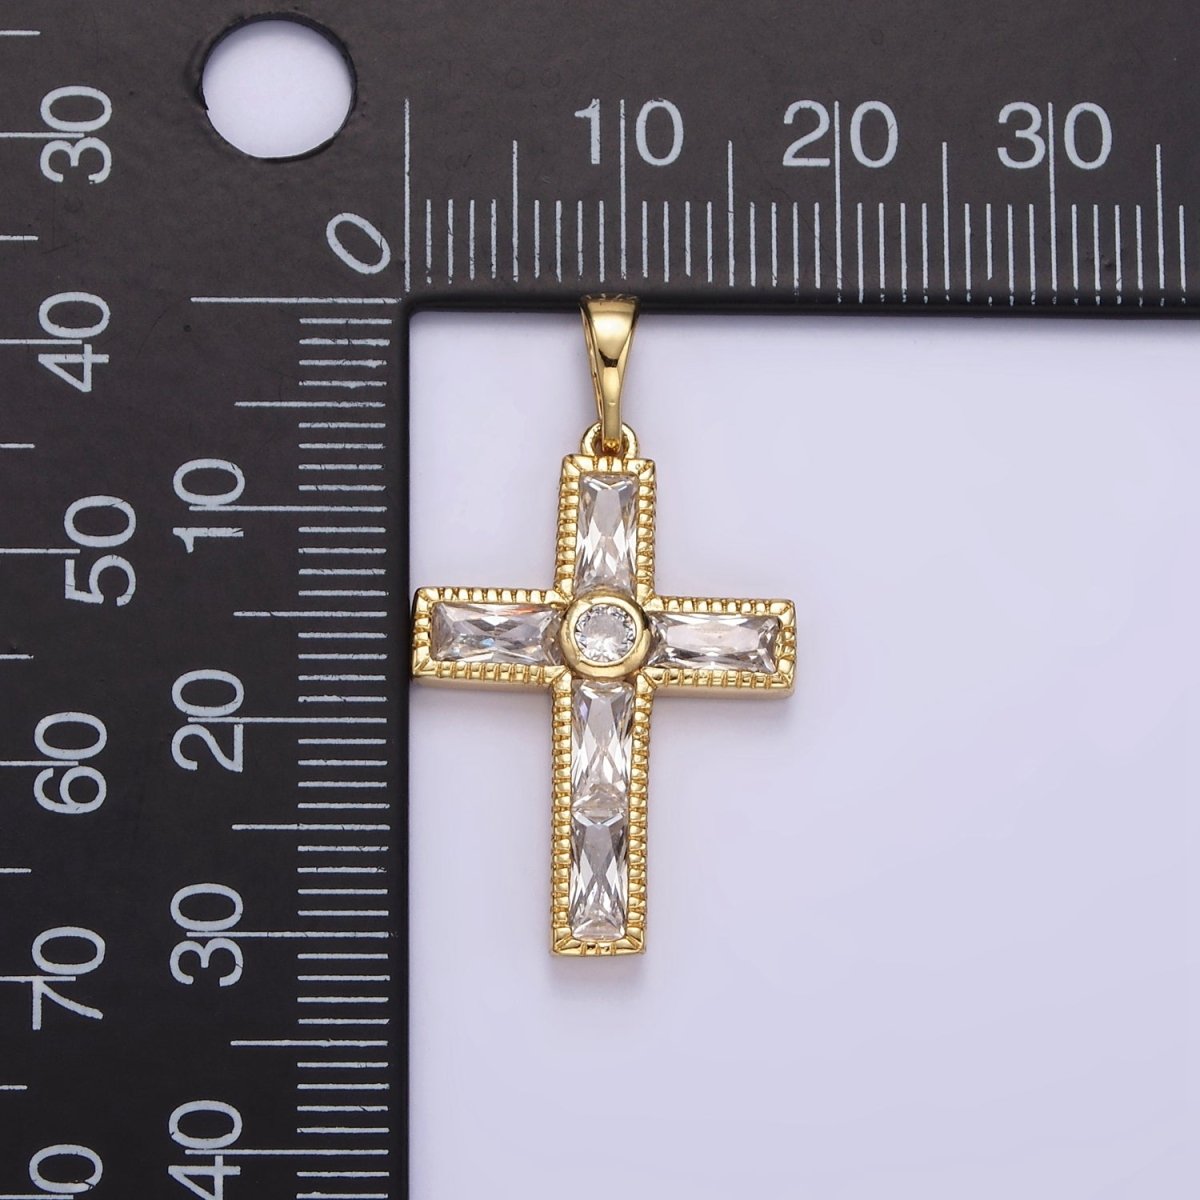 14K Gold Filled 30mm Clear CZ Round Baguette Lined Textured Pendant | AA725 - DLUXCA